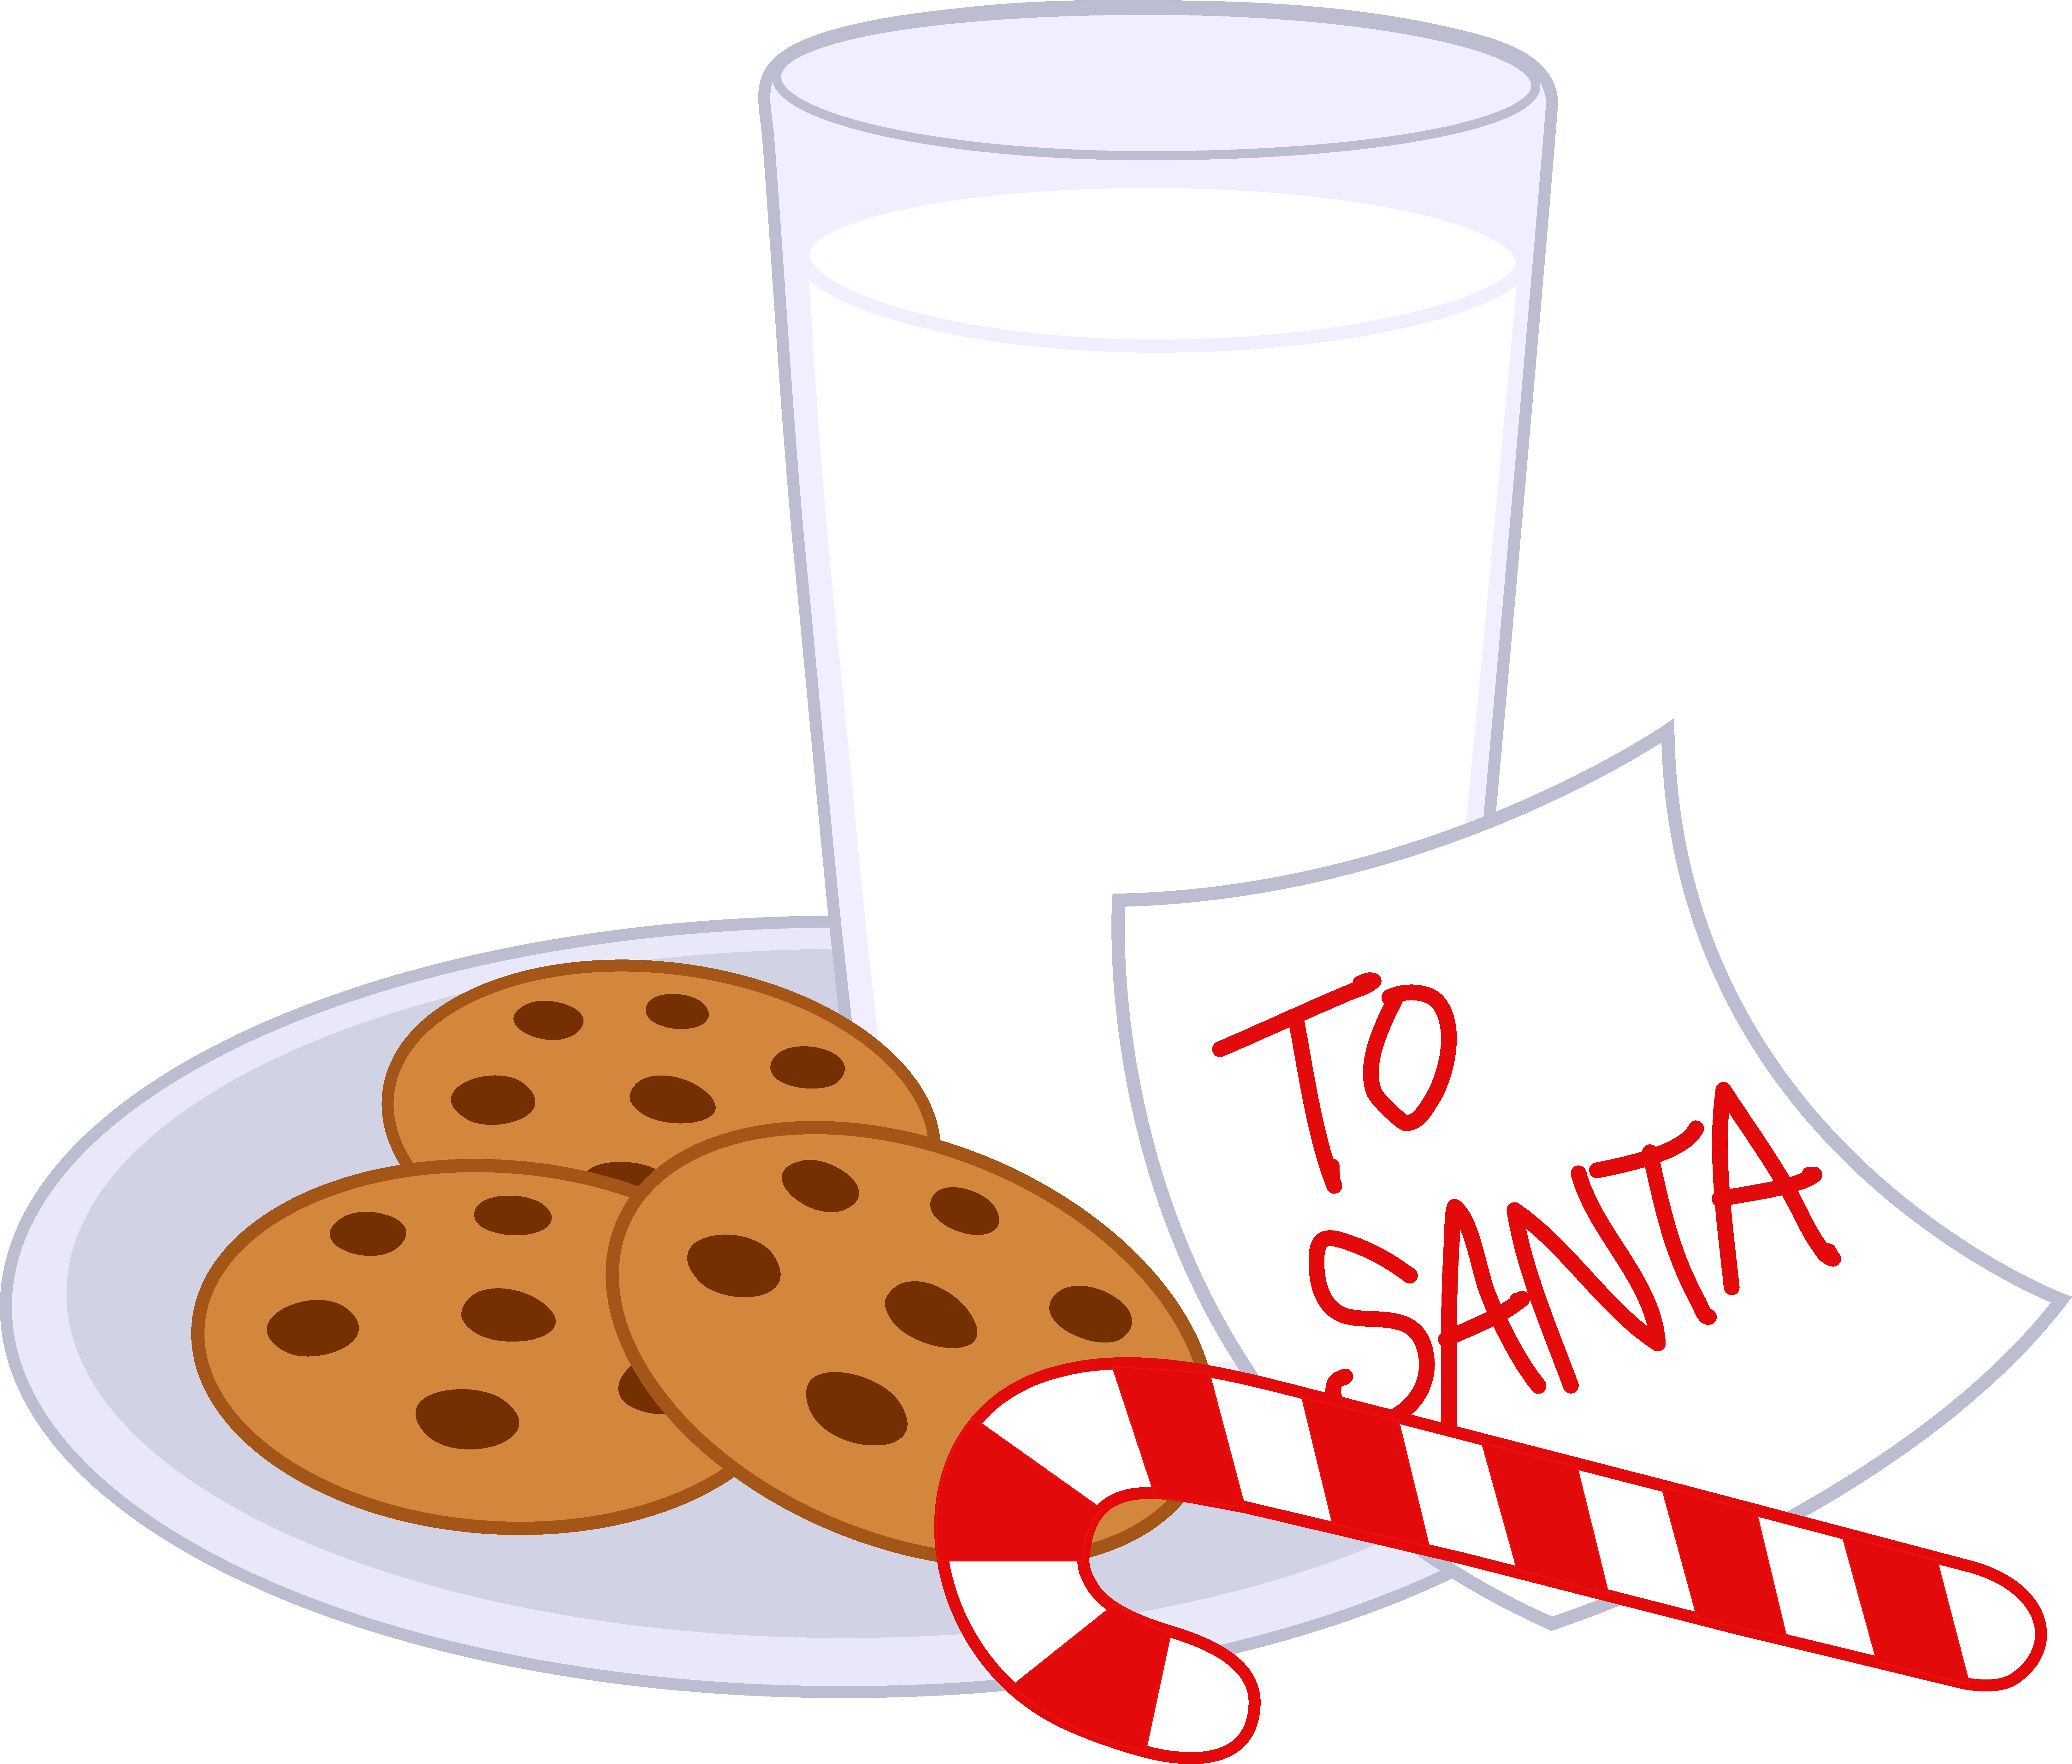 Cookies and Milk For Santa Claus.